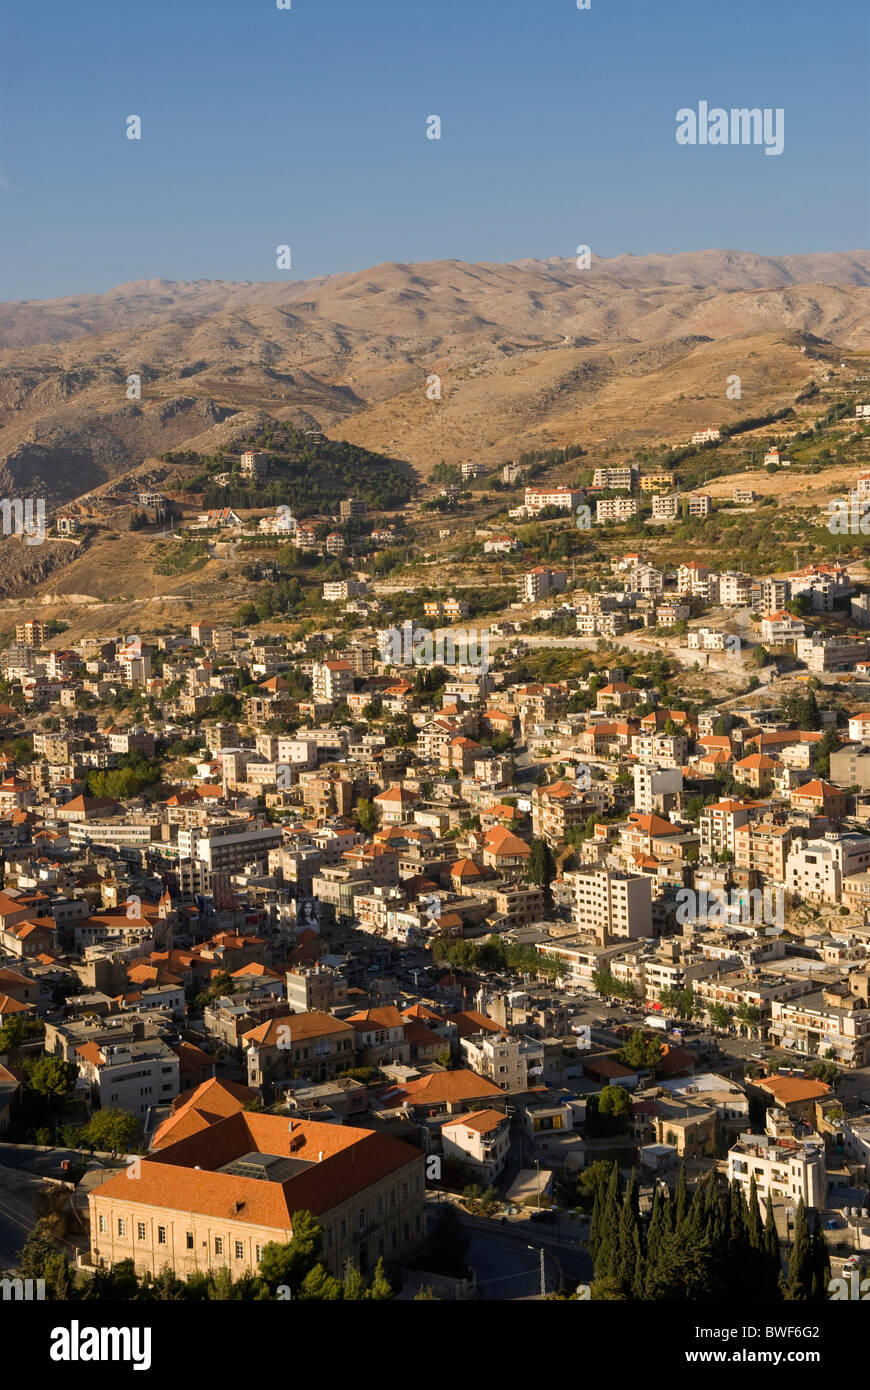 A general view of Zahle, Bekaa Valley, LEBANON. Stock Photo